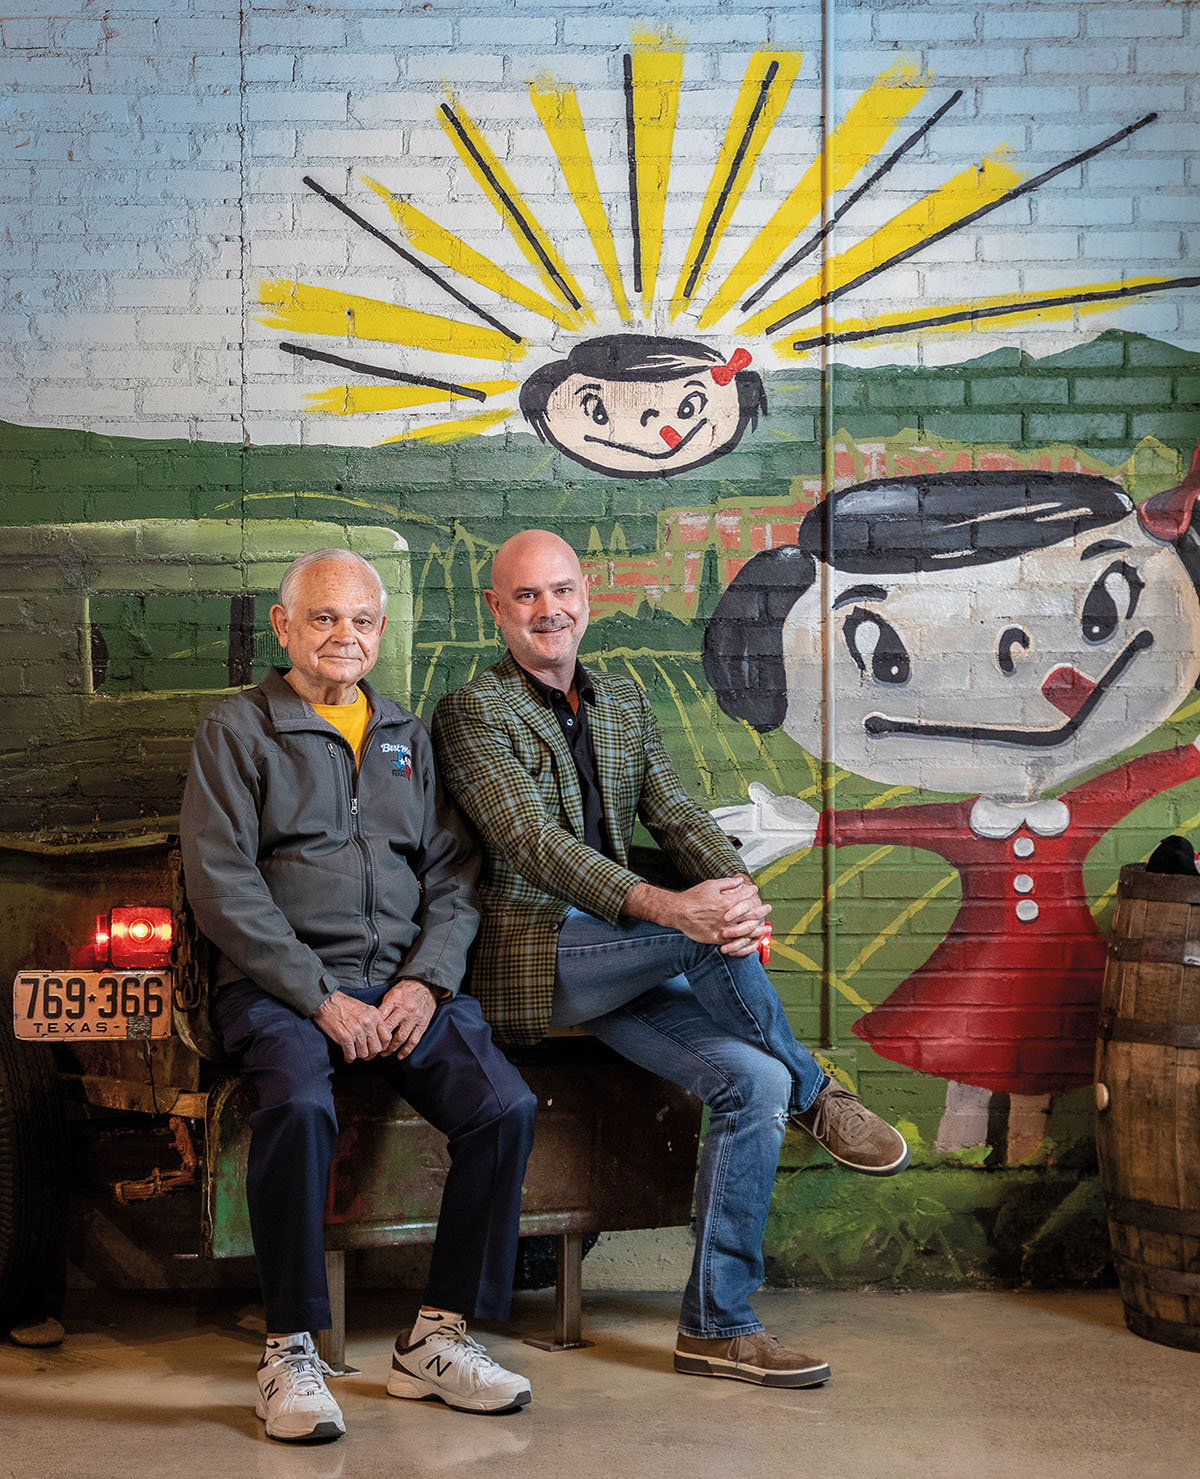 Two men sit on a small bench in front of a mural painted with the Best Maid cartoon mascot and a sun